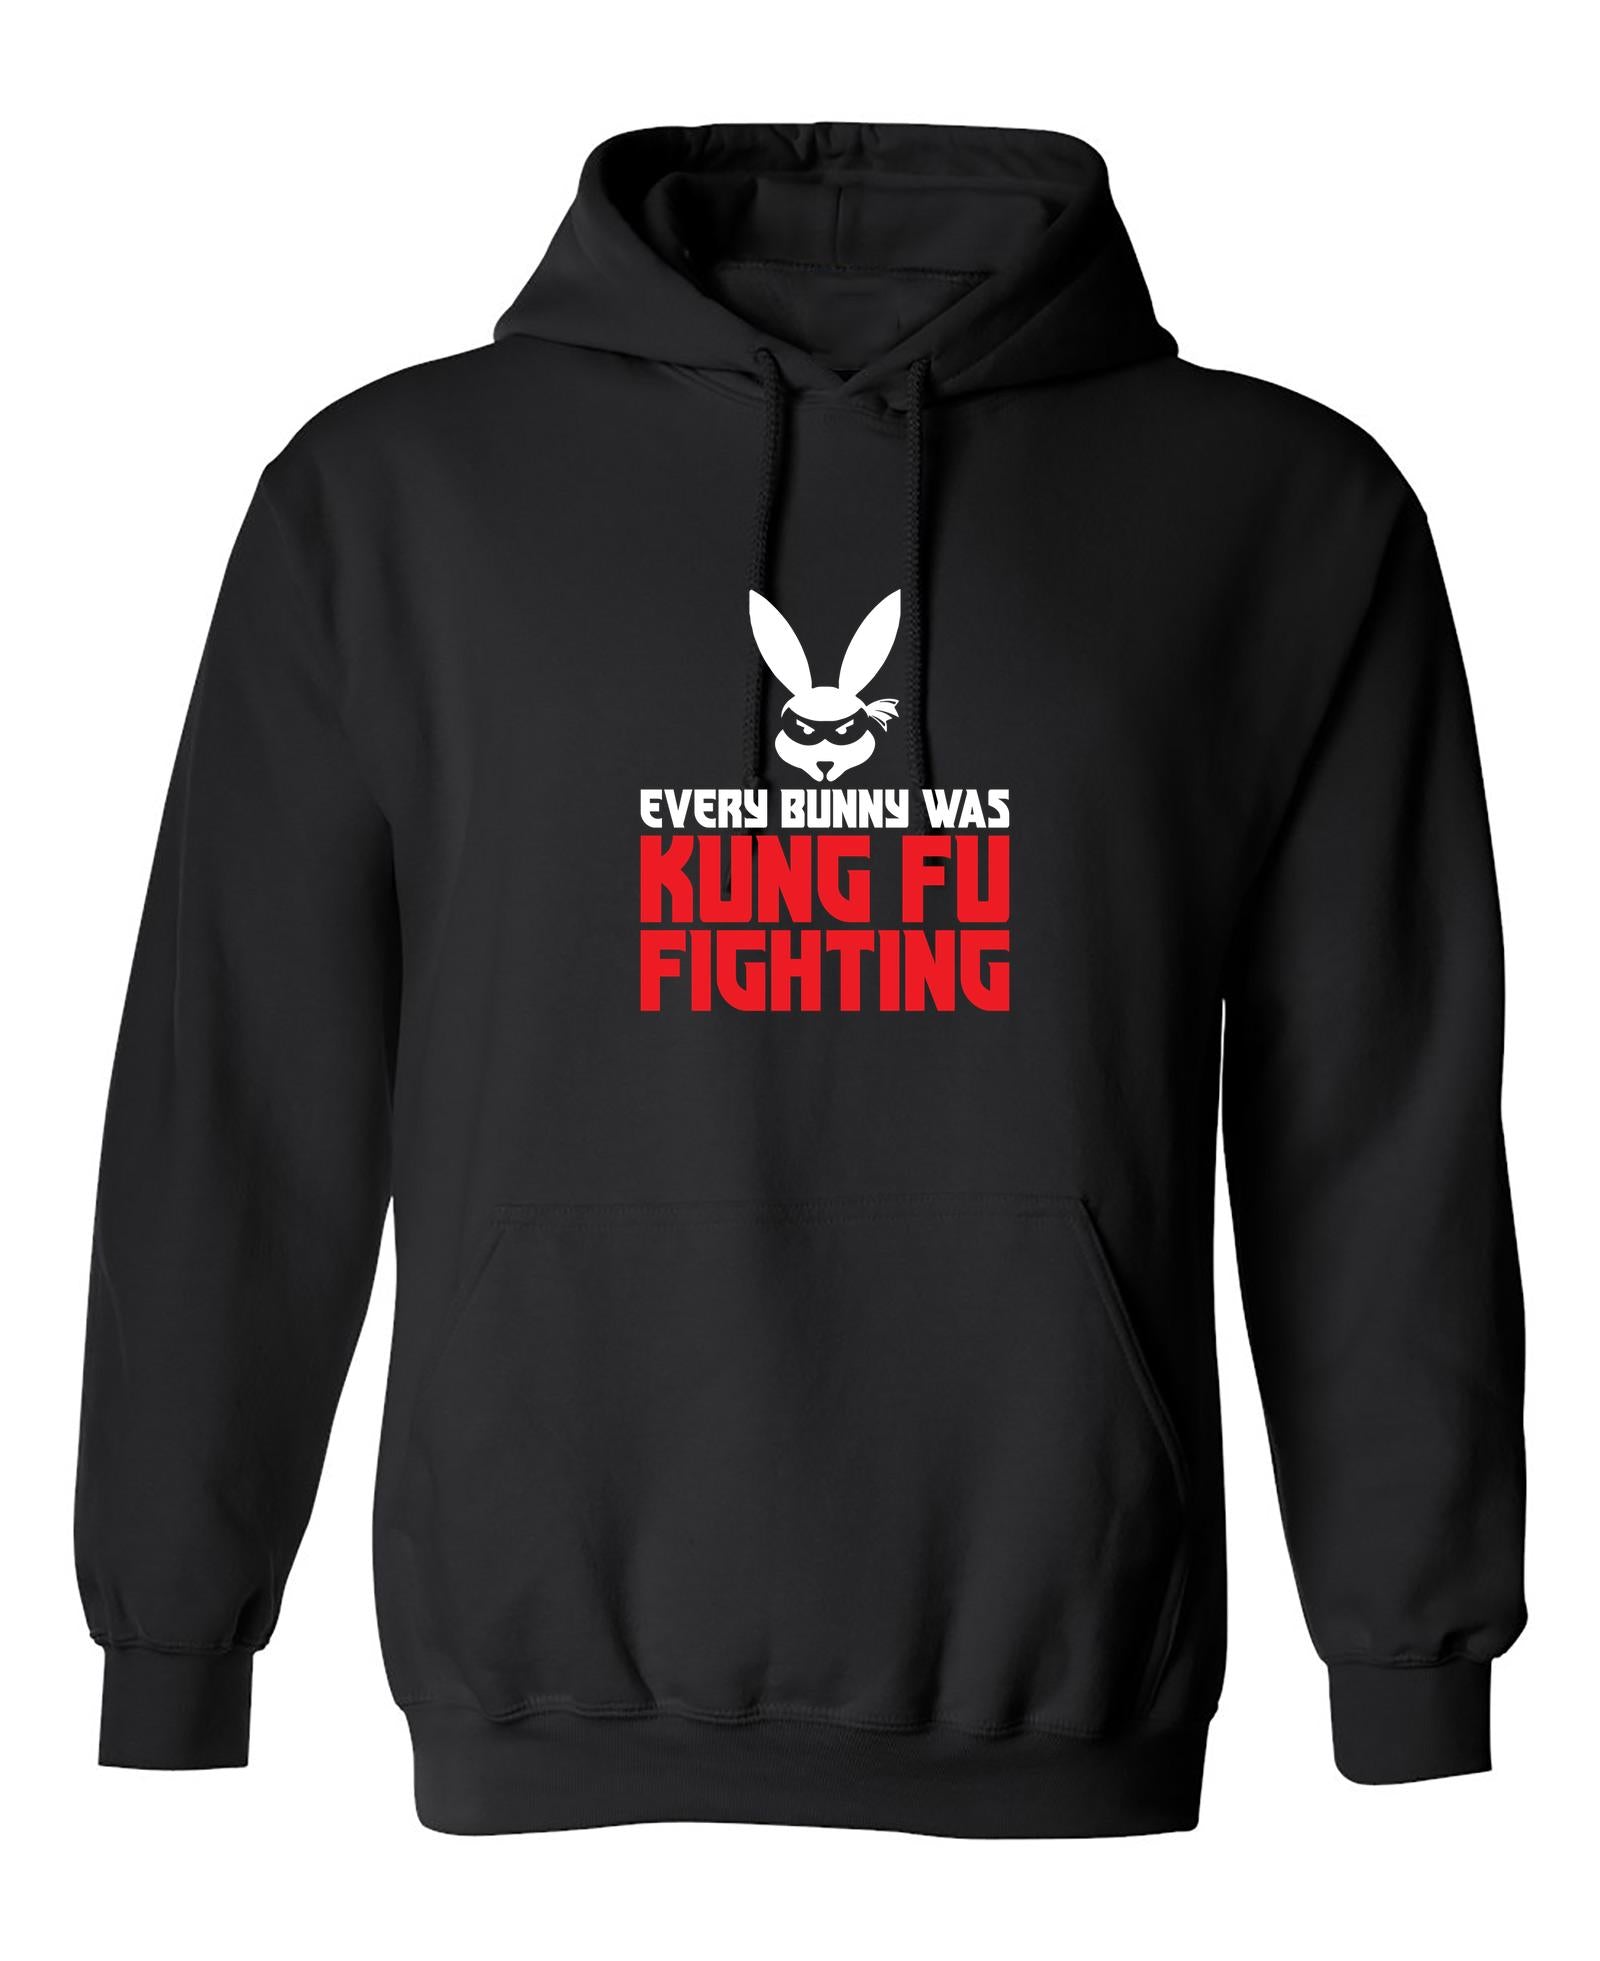 Funny T-Shirts design "PS_1198_BUNNY_FIGHTING-01"